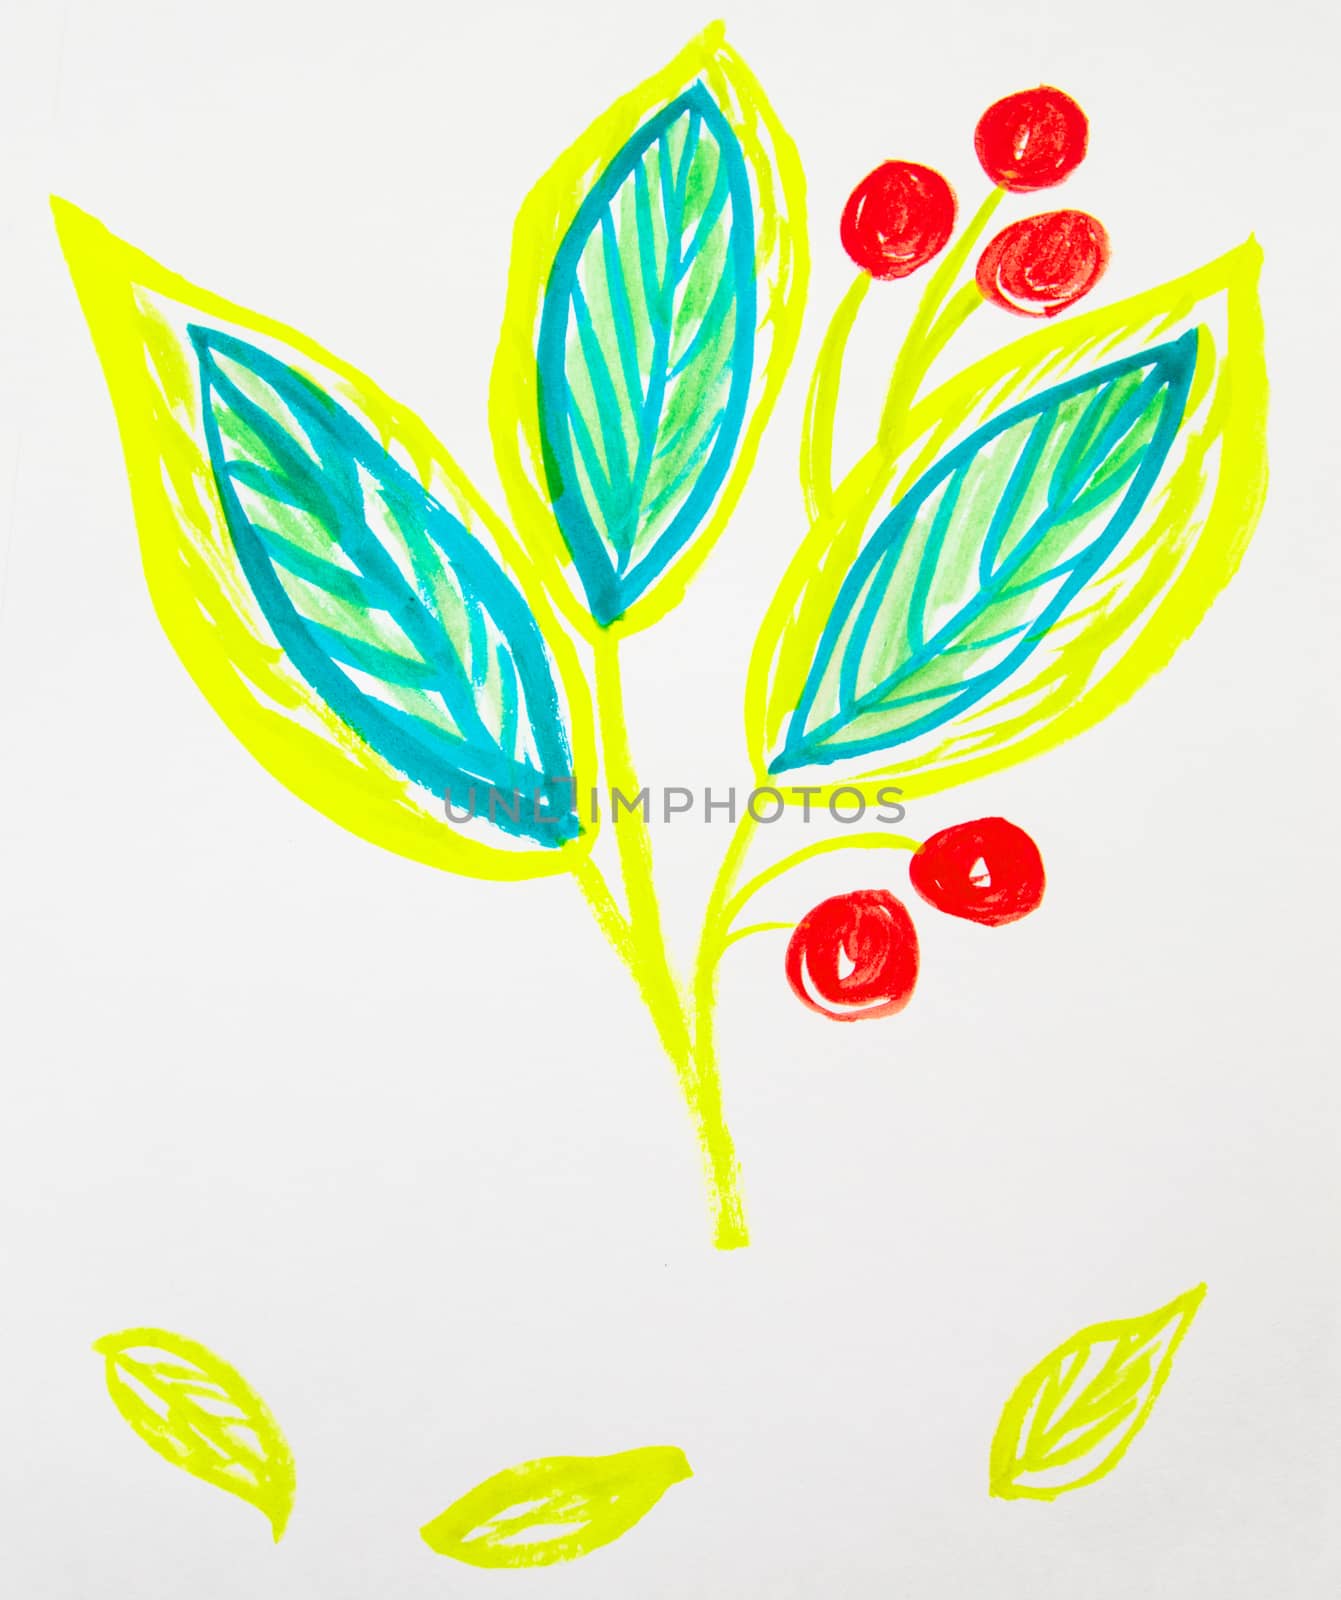 Cute hand-Drawn watercolor flower stem with leaves and berries. Yellow and green spring flowers, Botanical garden plants.